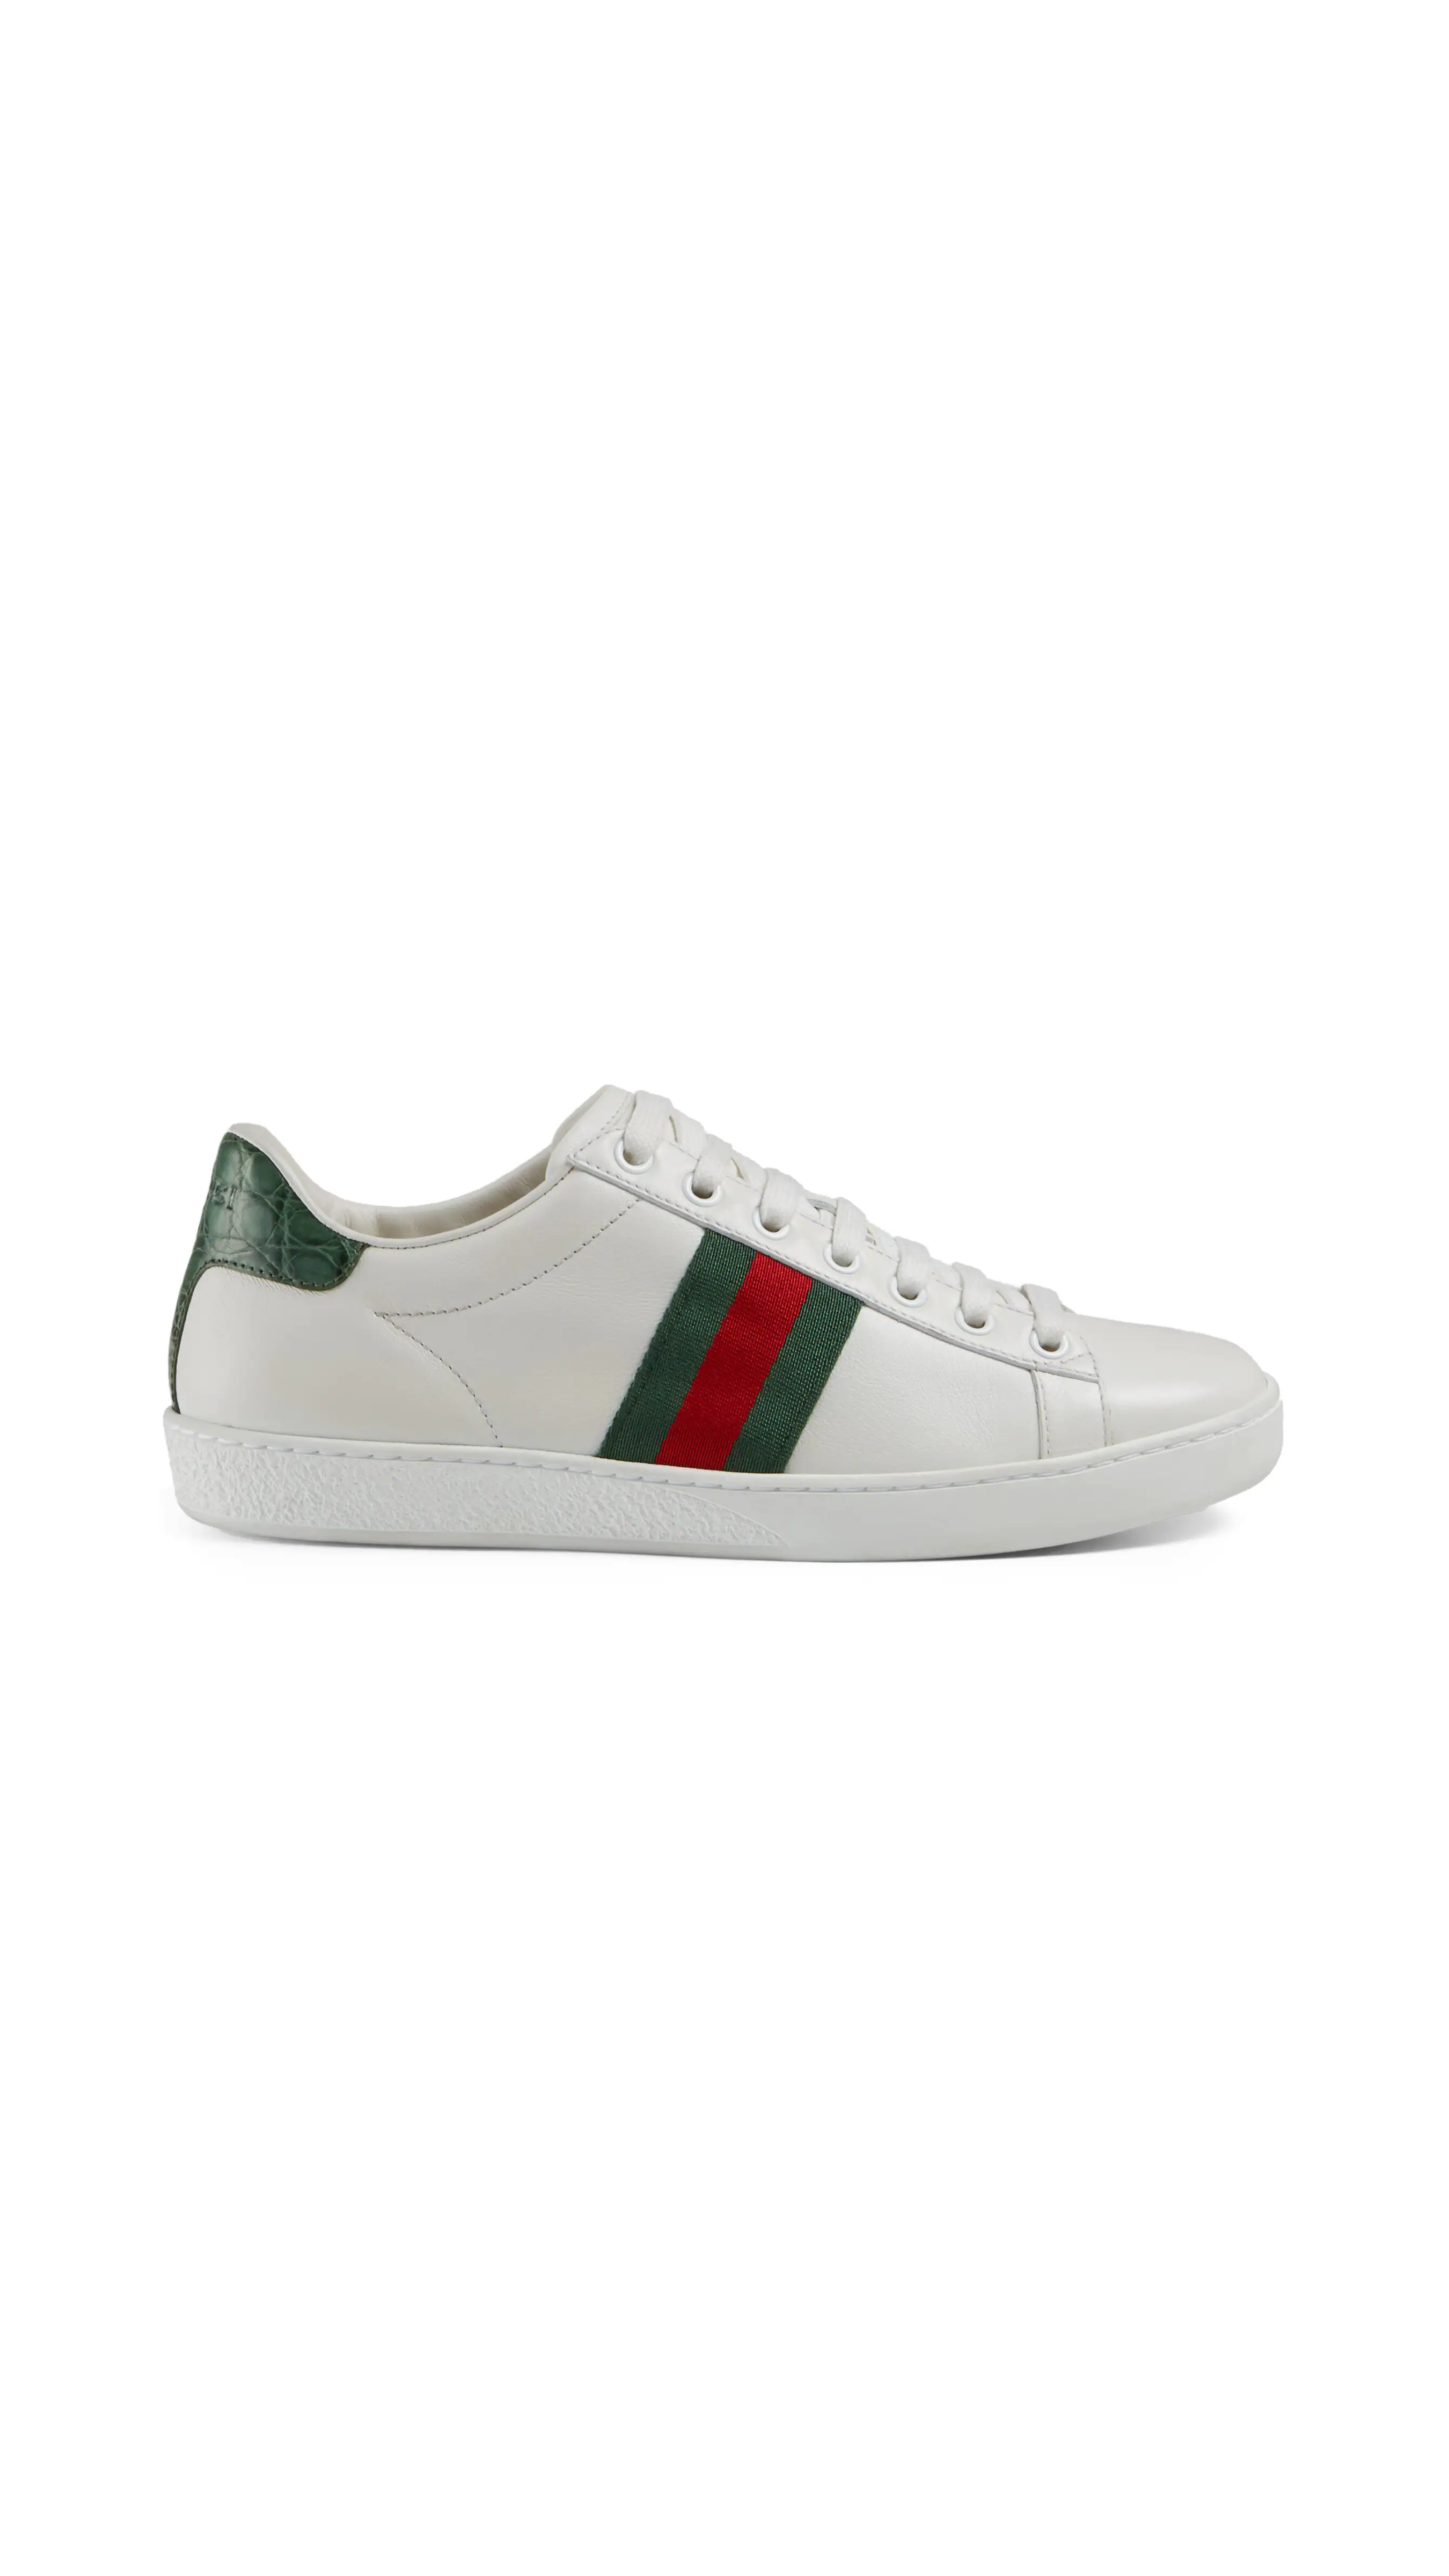 Ace Leather Sneaker - White/Green/Red